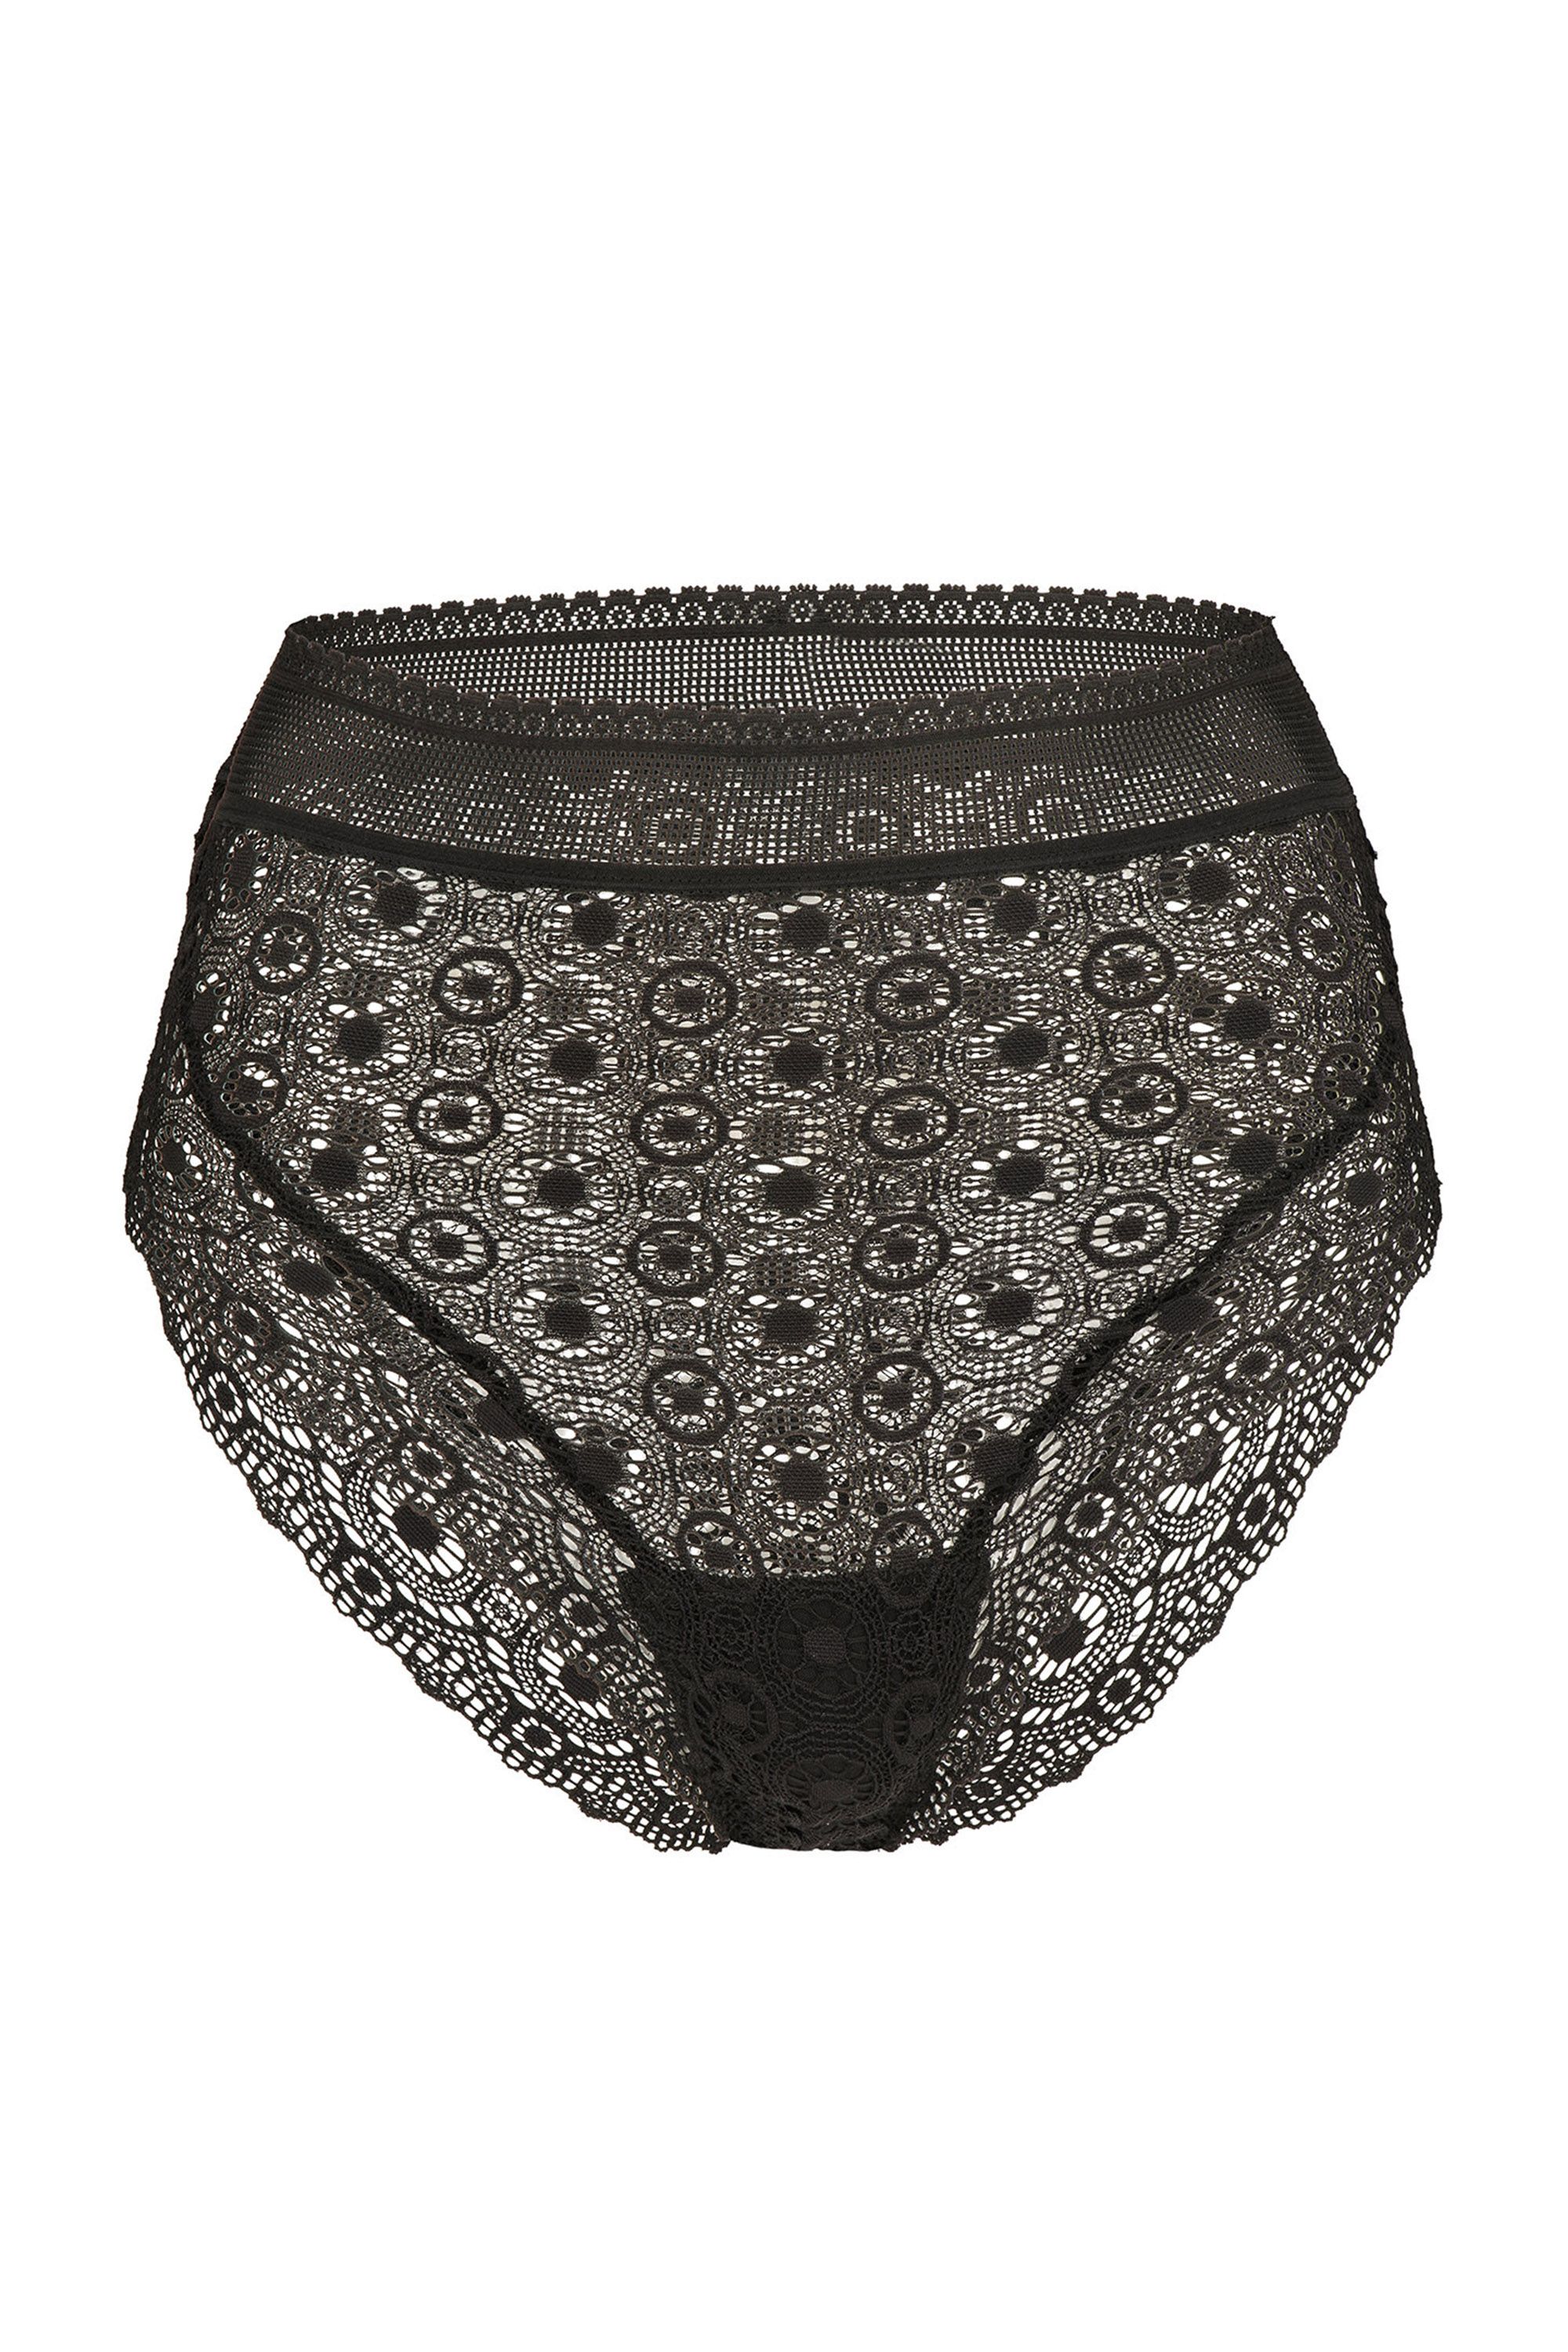 16 Granny Panties That Are Comfortable and Cute